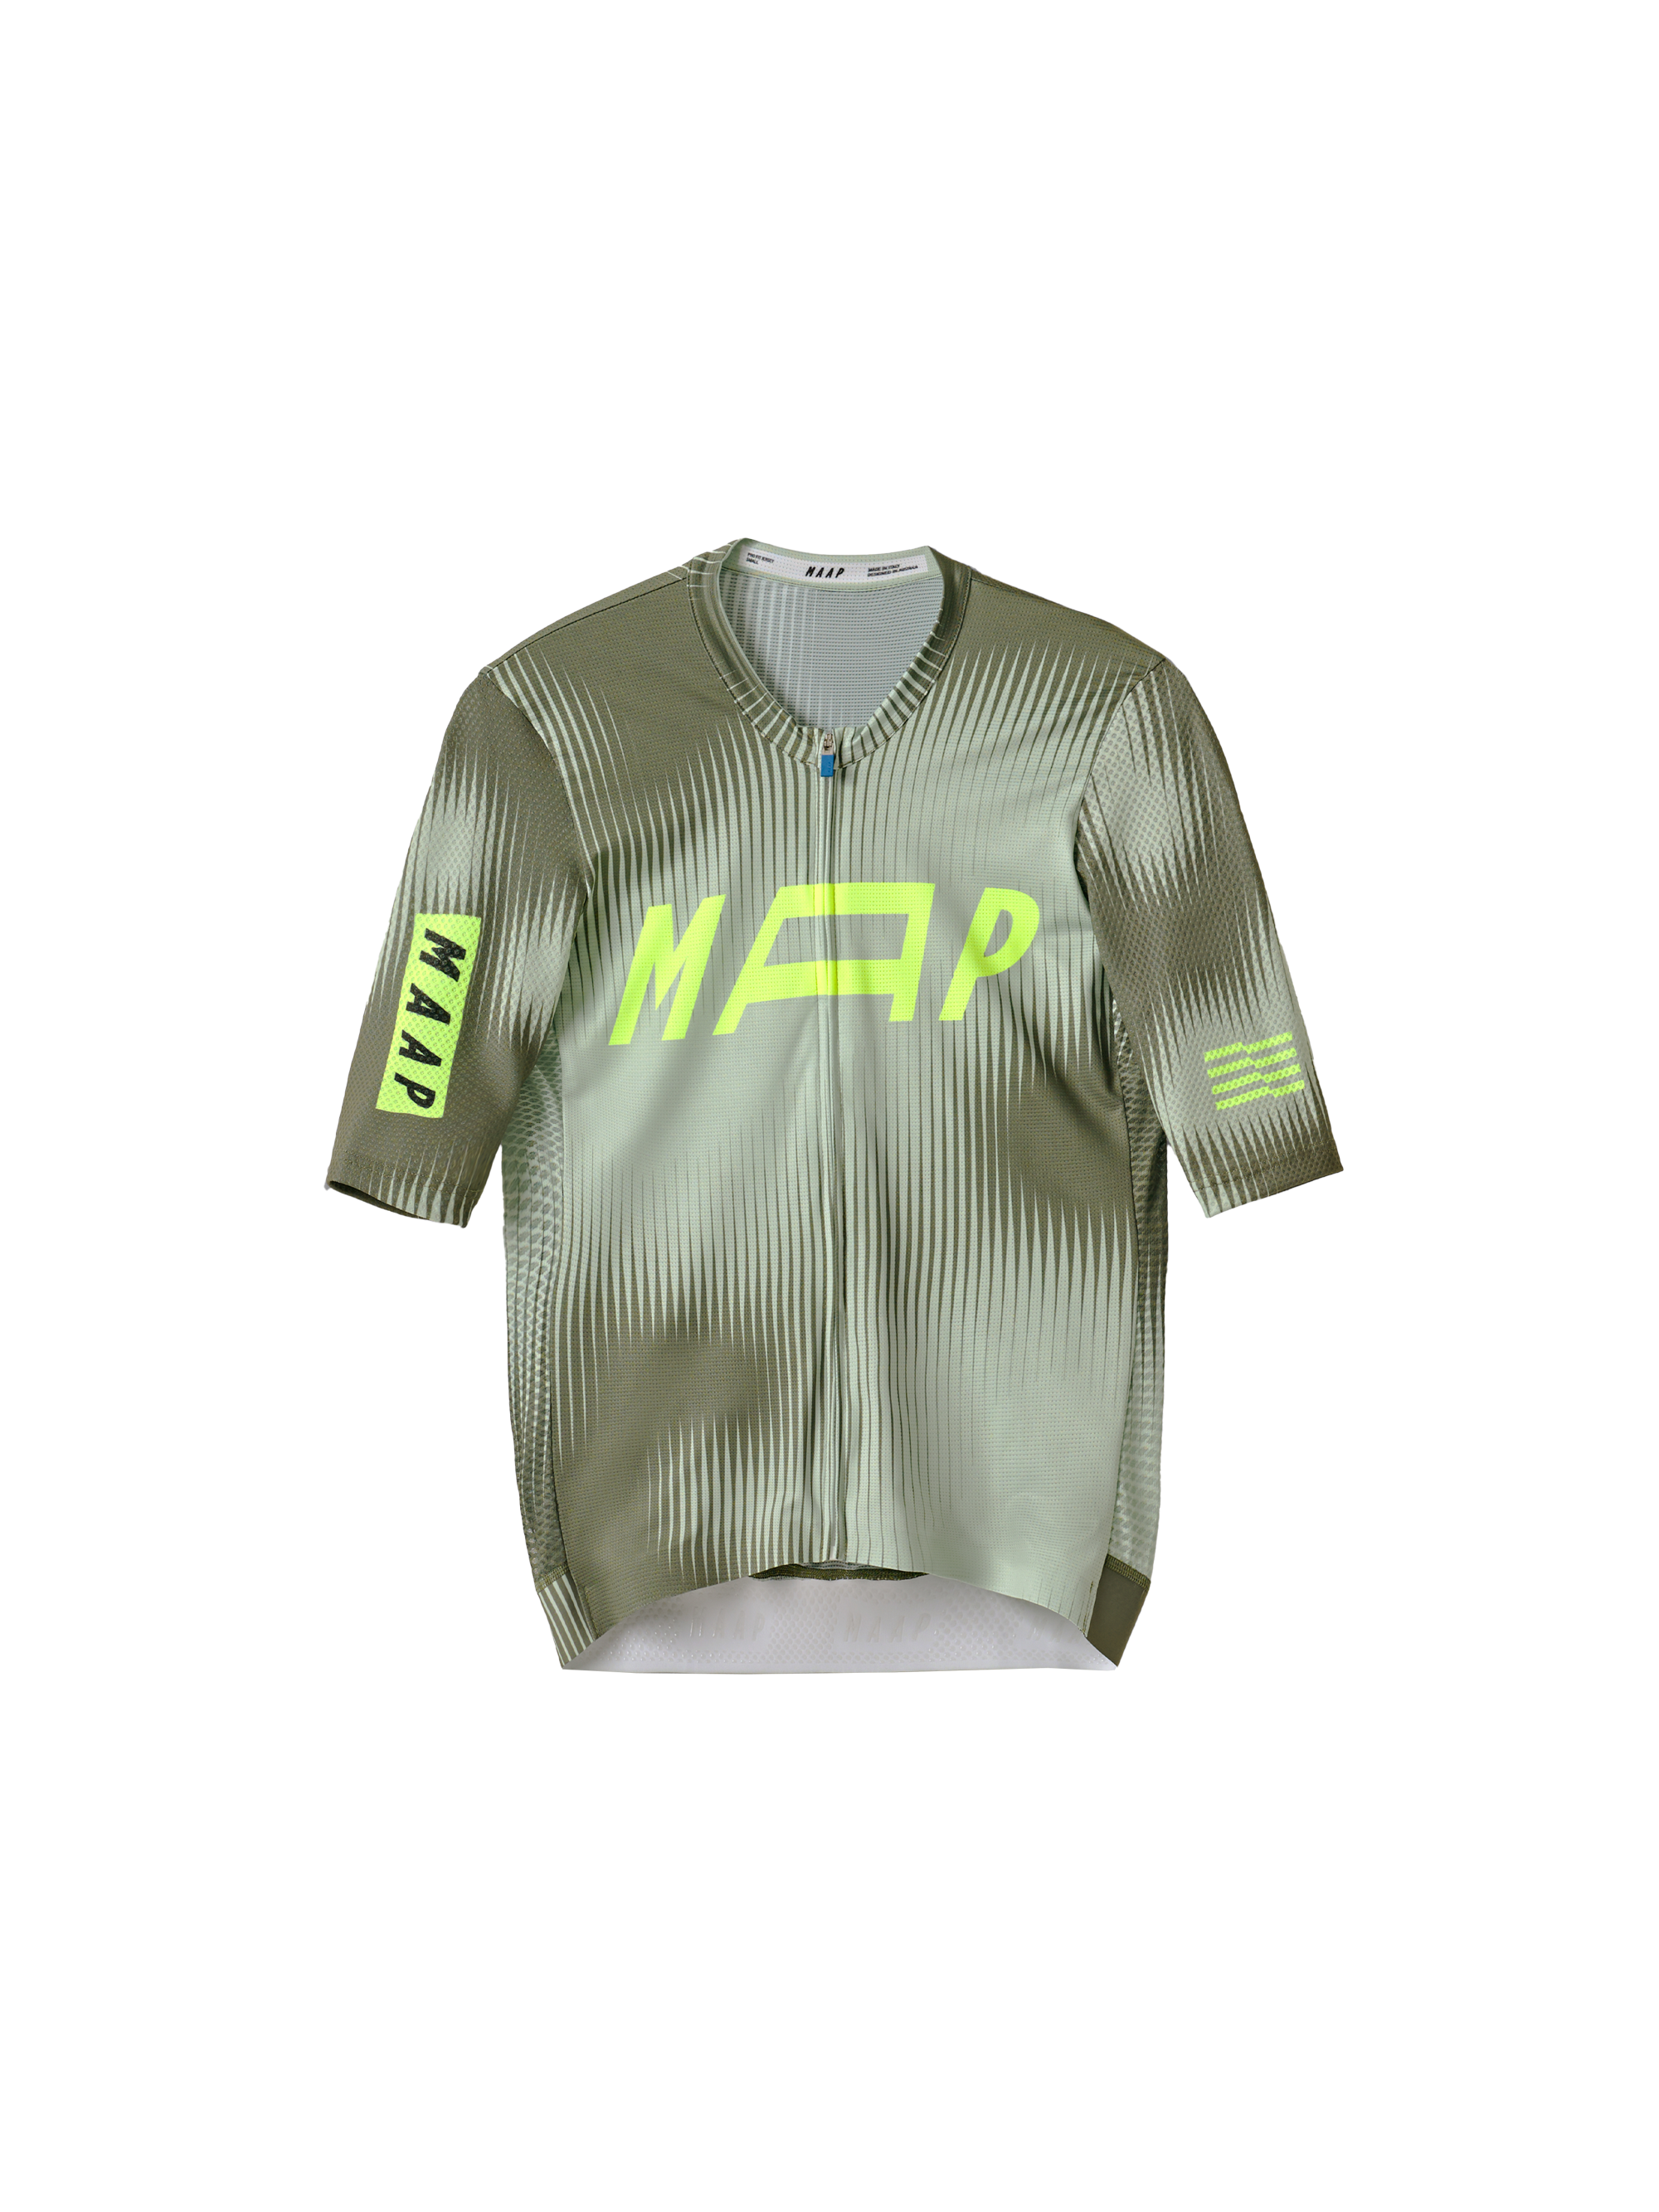 Privateer I.S Pro Jersey